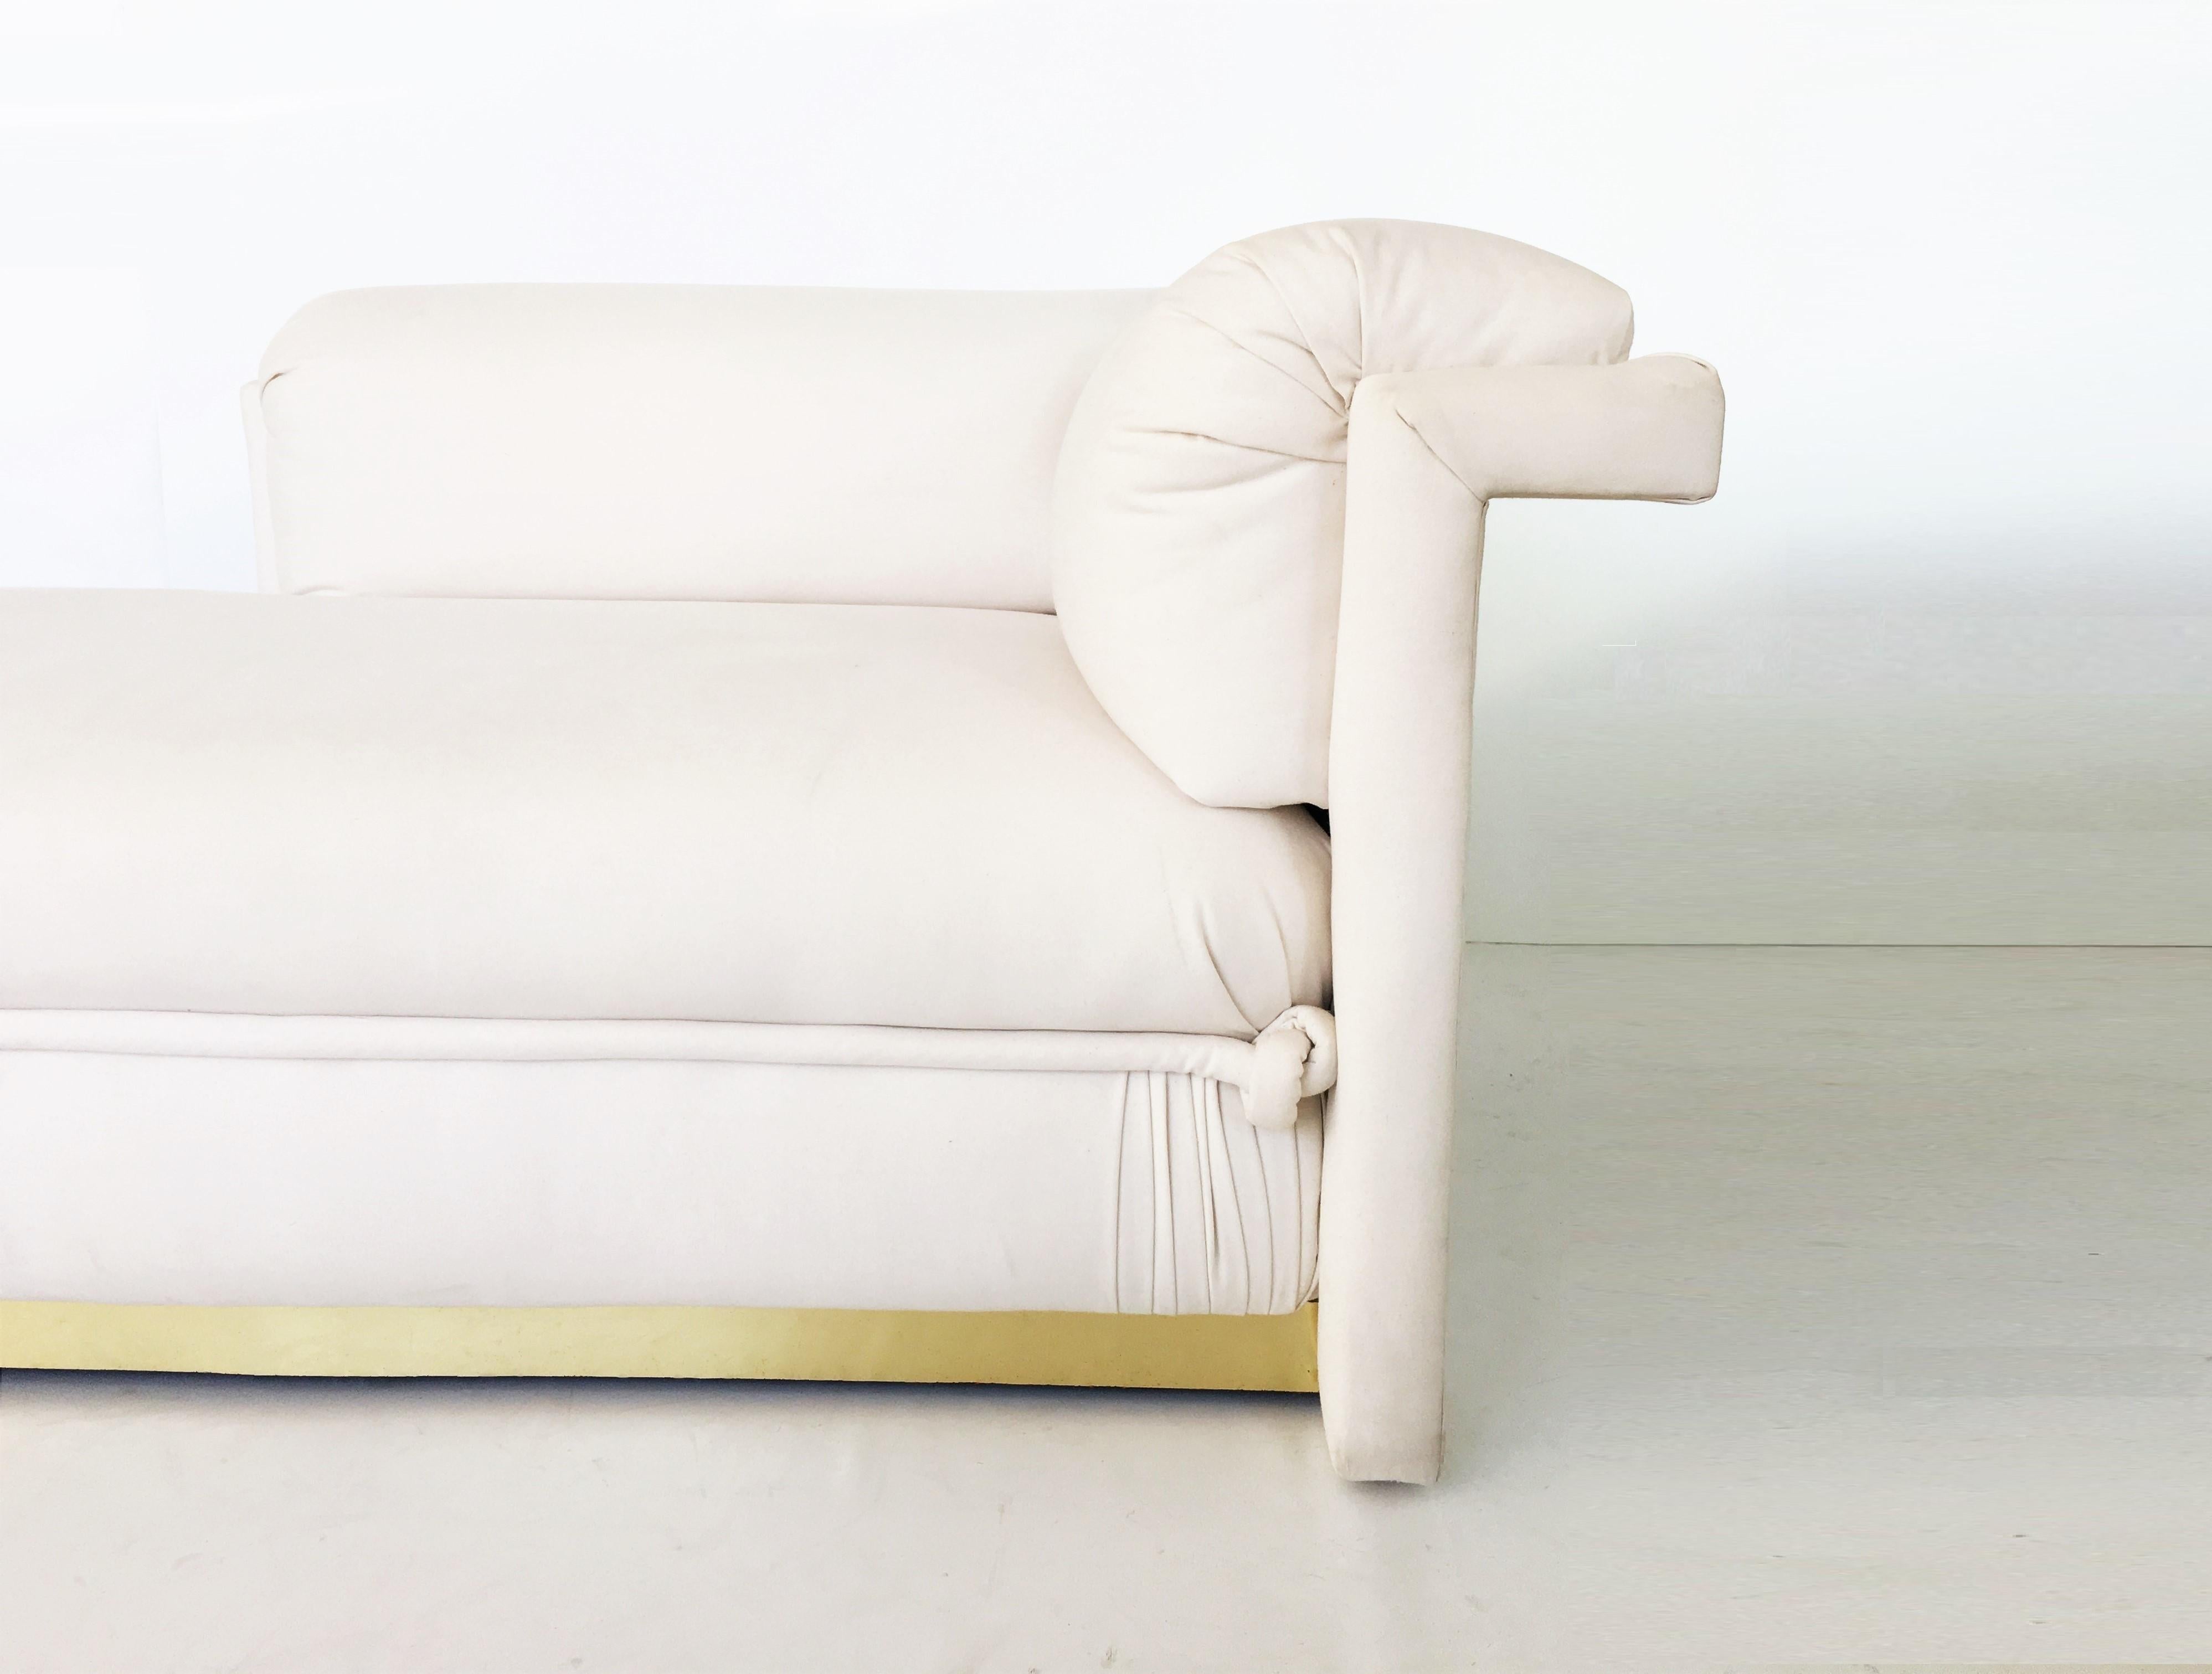 Unusual French Art Deco chaise longue with brass base. This exquisite chaise longue that combine the most contemporary shape. Newly upholstered with beautiful rope detailing and raised upon brass plinth base so they appear to float. Very comfortable.